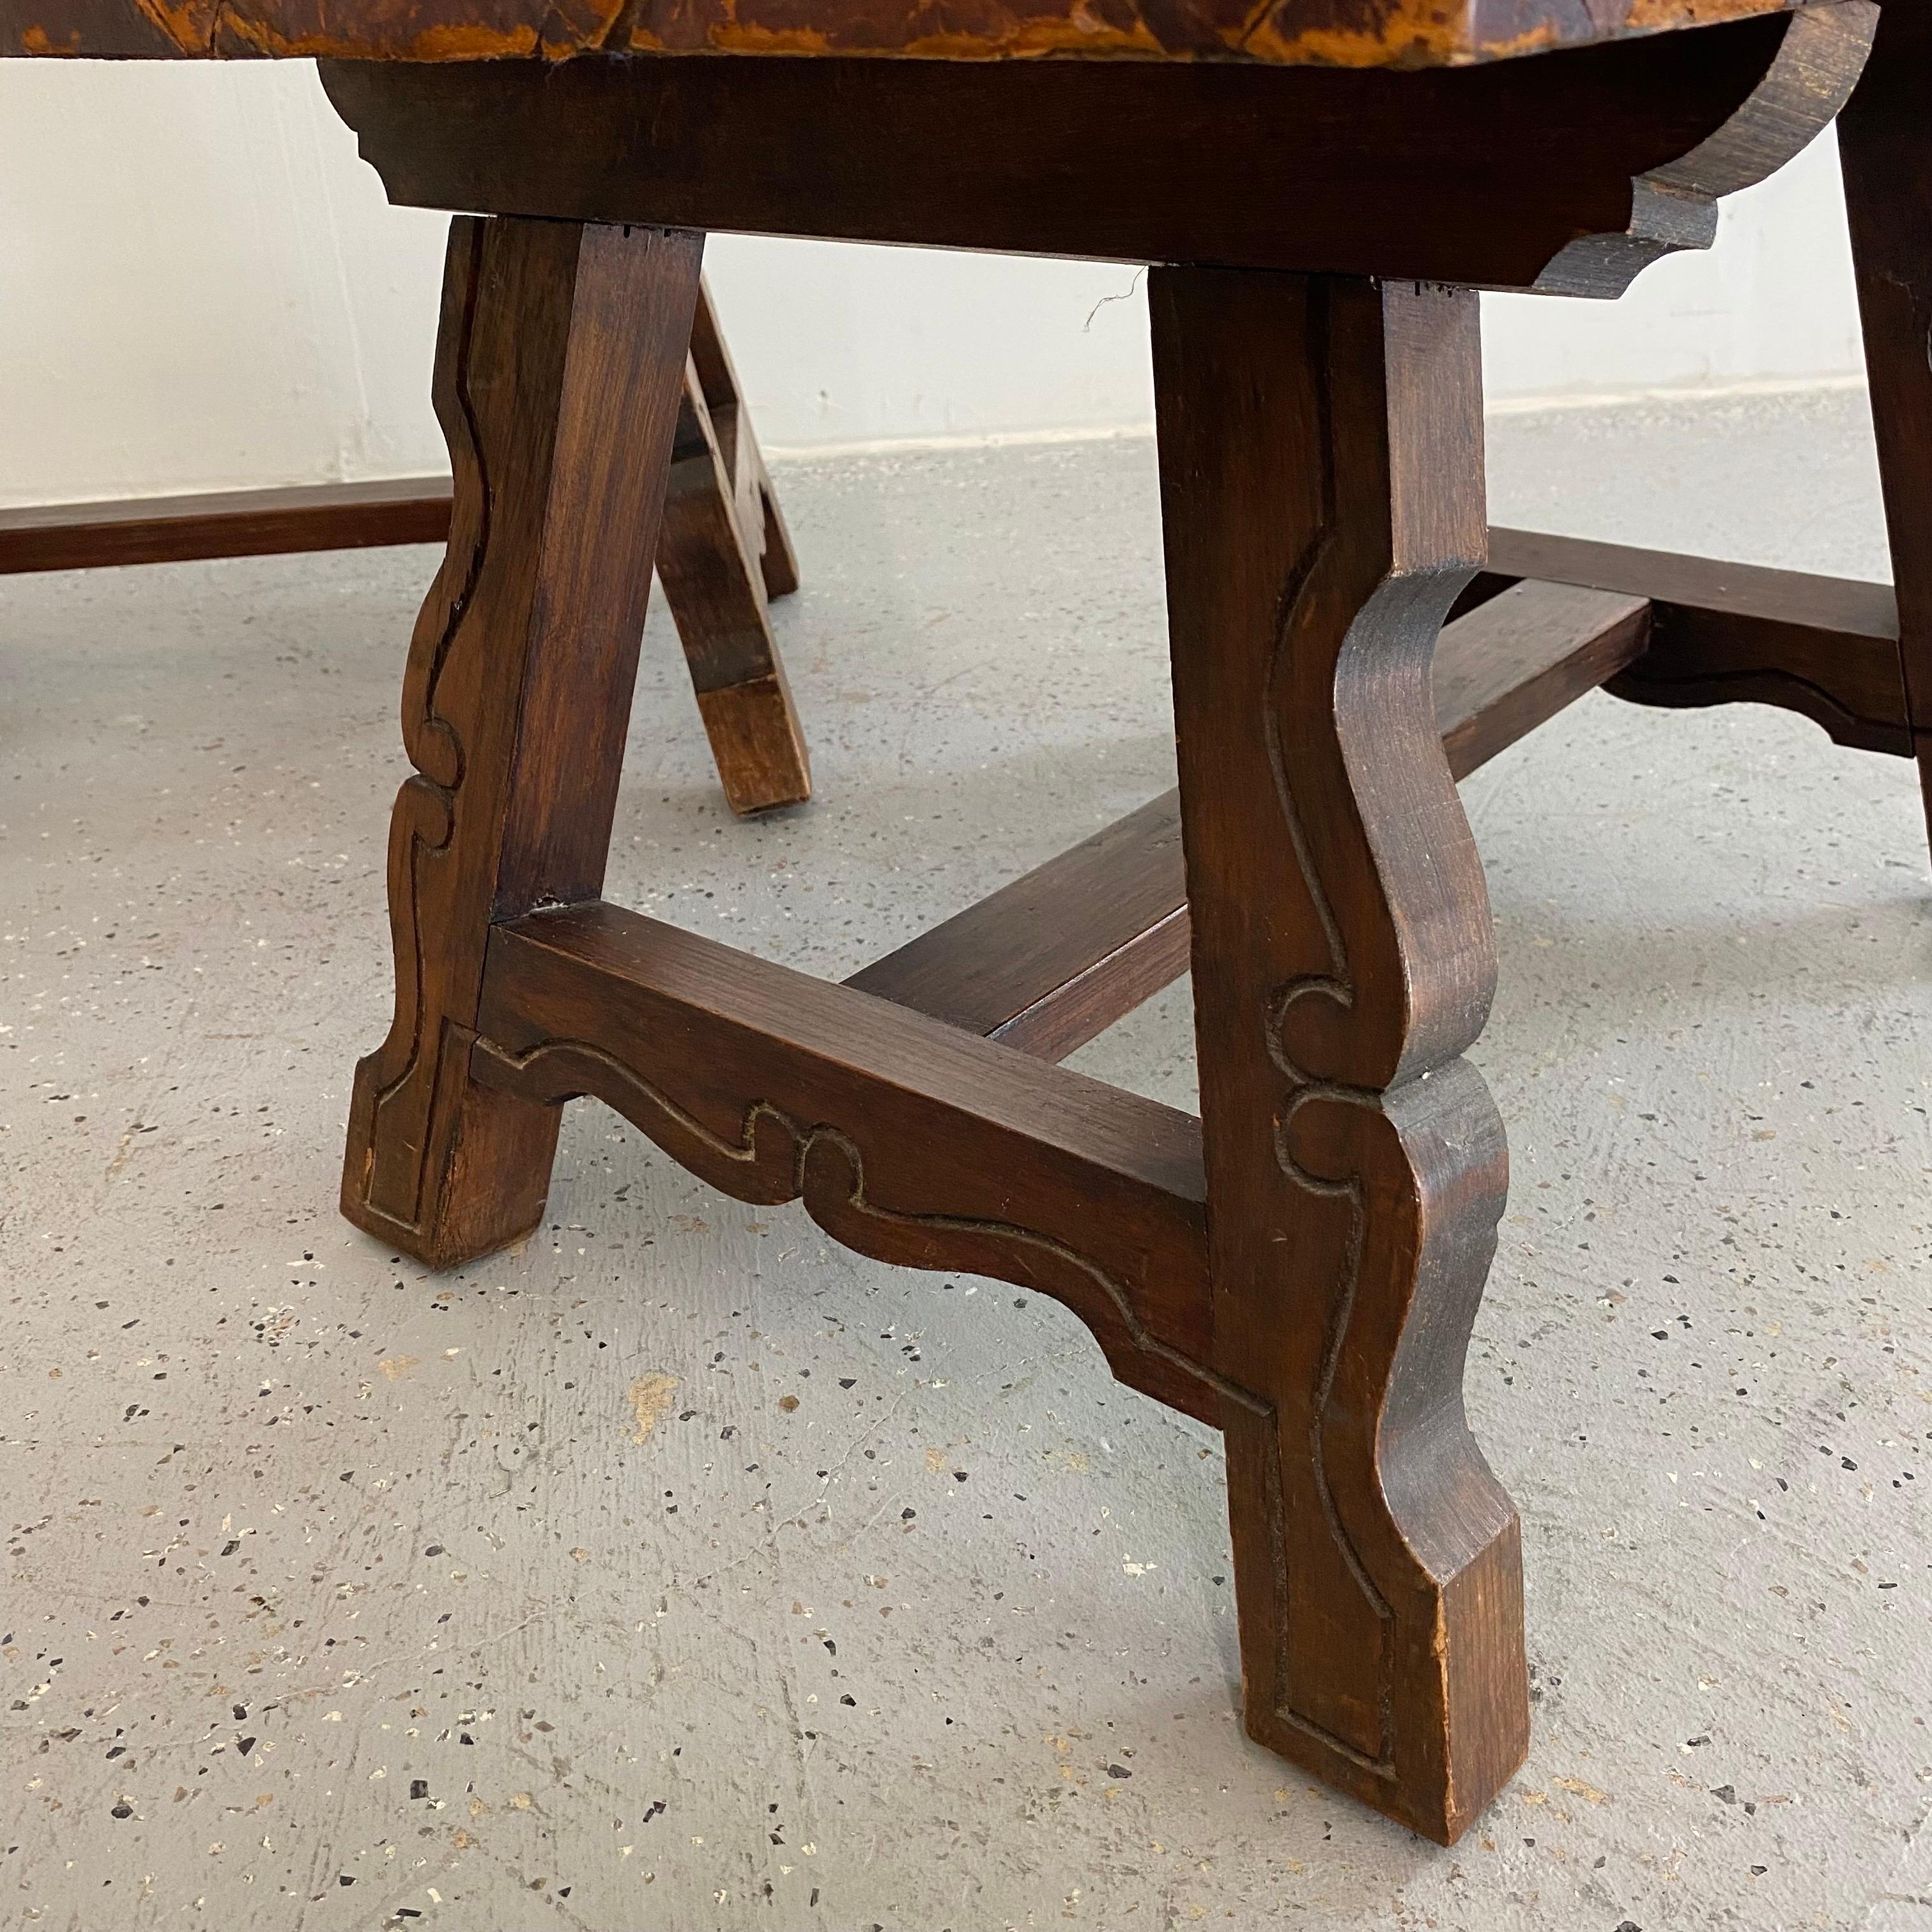 Likely European, maybe Belgian, small scale side tables. Simple scroll design with carved hardwood frame and leather top. Each show heavy wear but have a great look. Distressed but structurally sound. 

Free Shipping in the continental US.